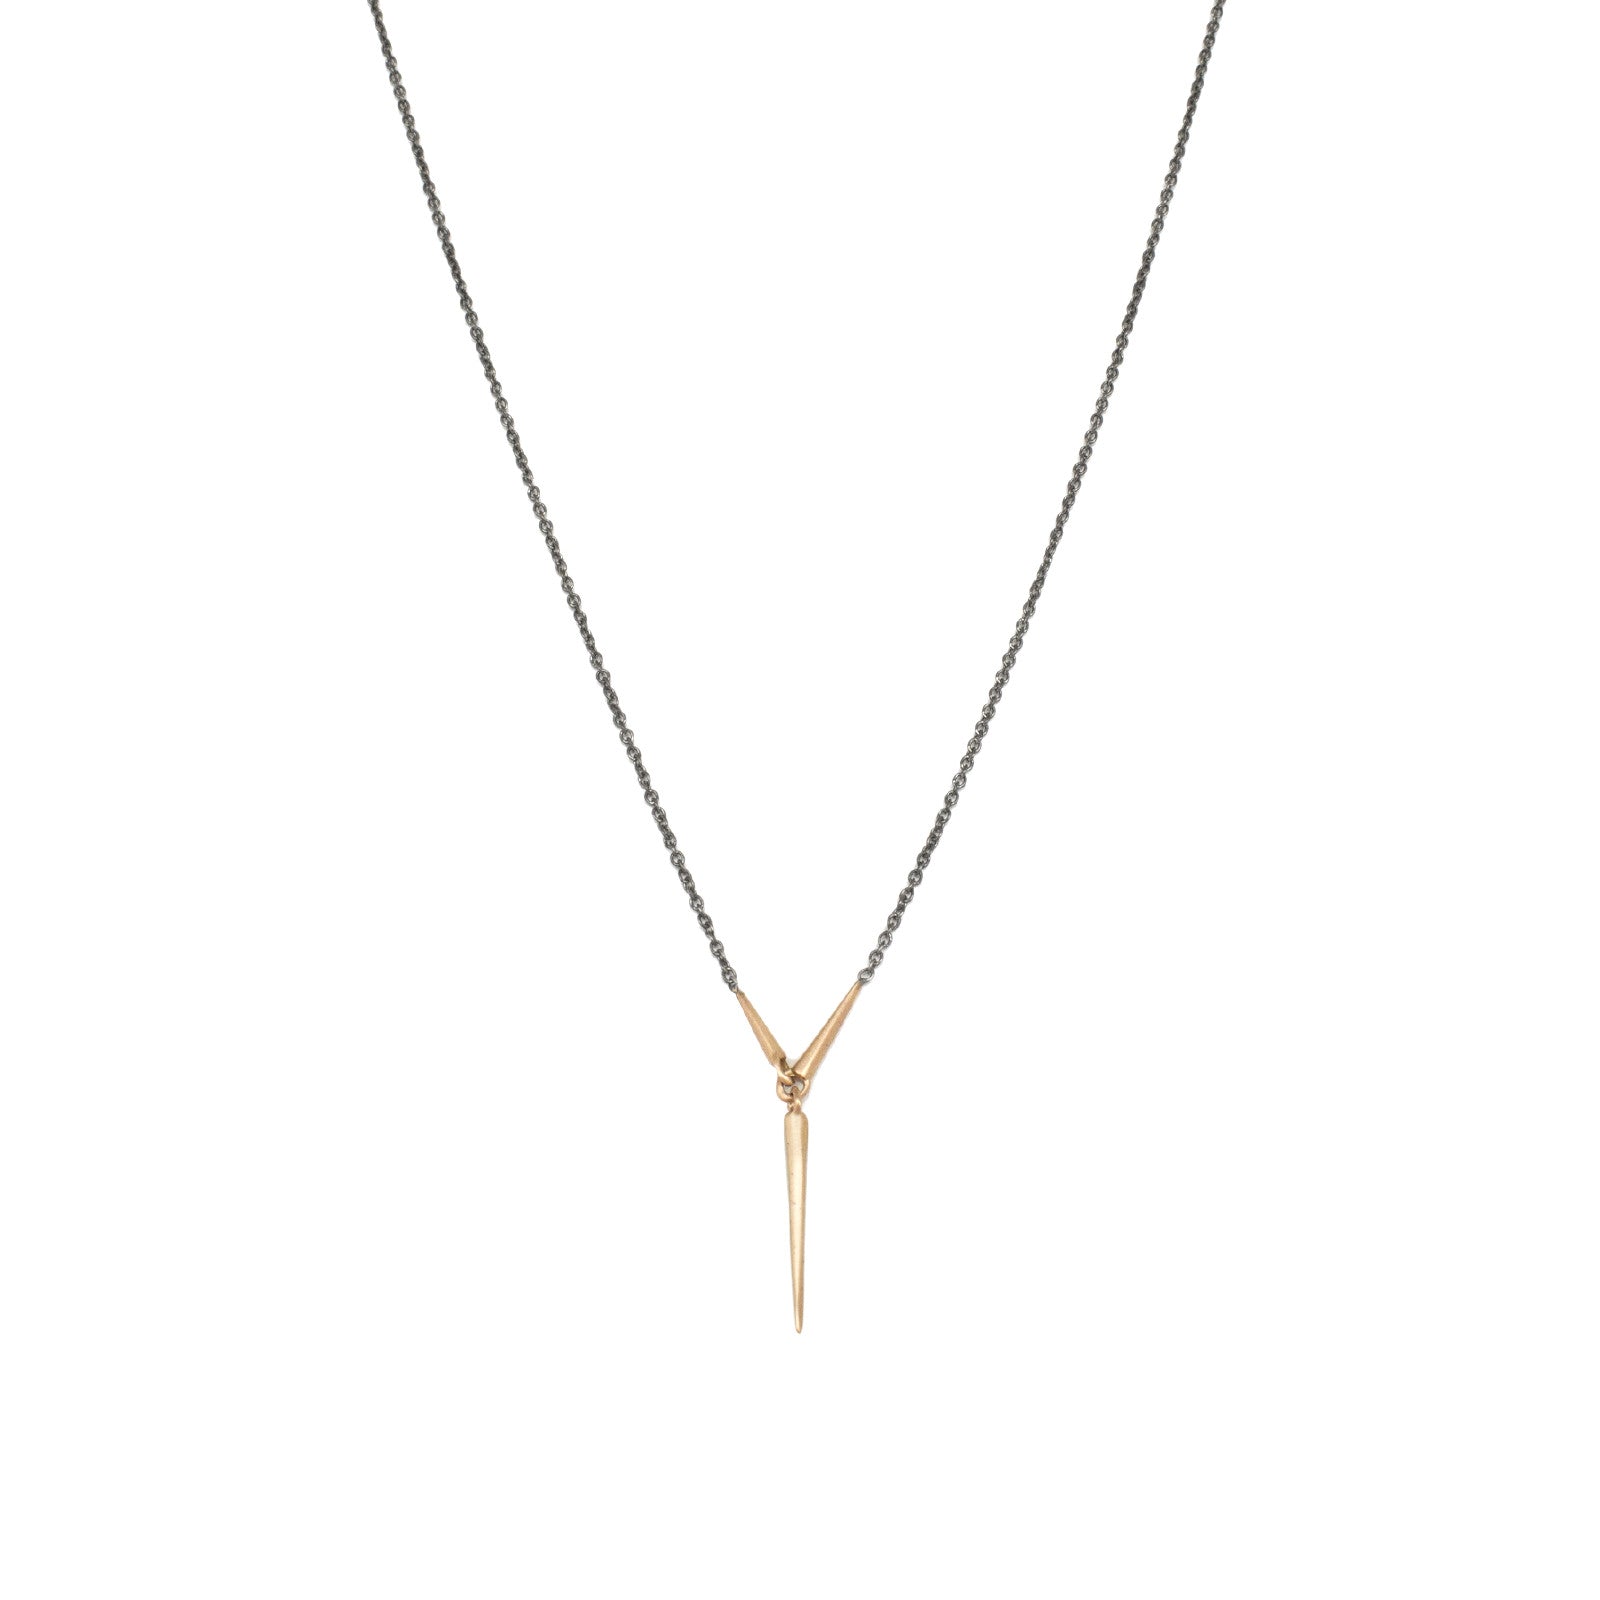 Offset Circle Necklace 14K Rose gold/oxidized Silver Chain